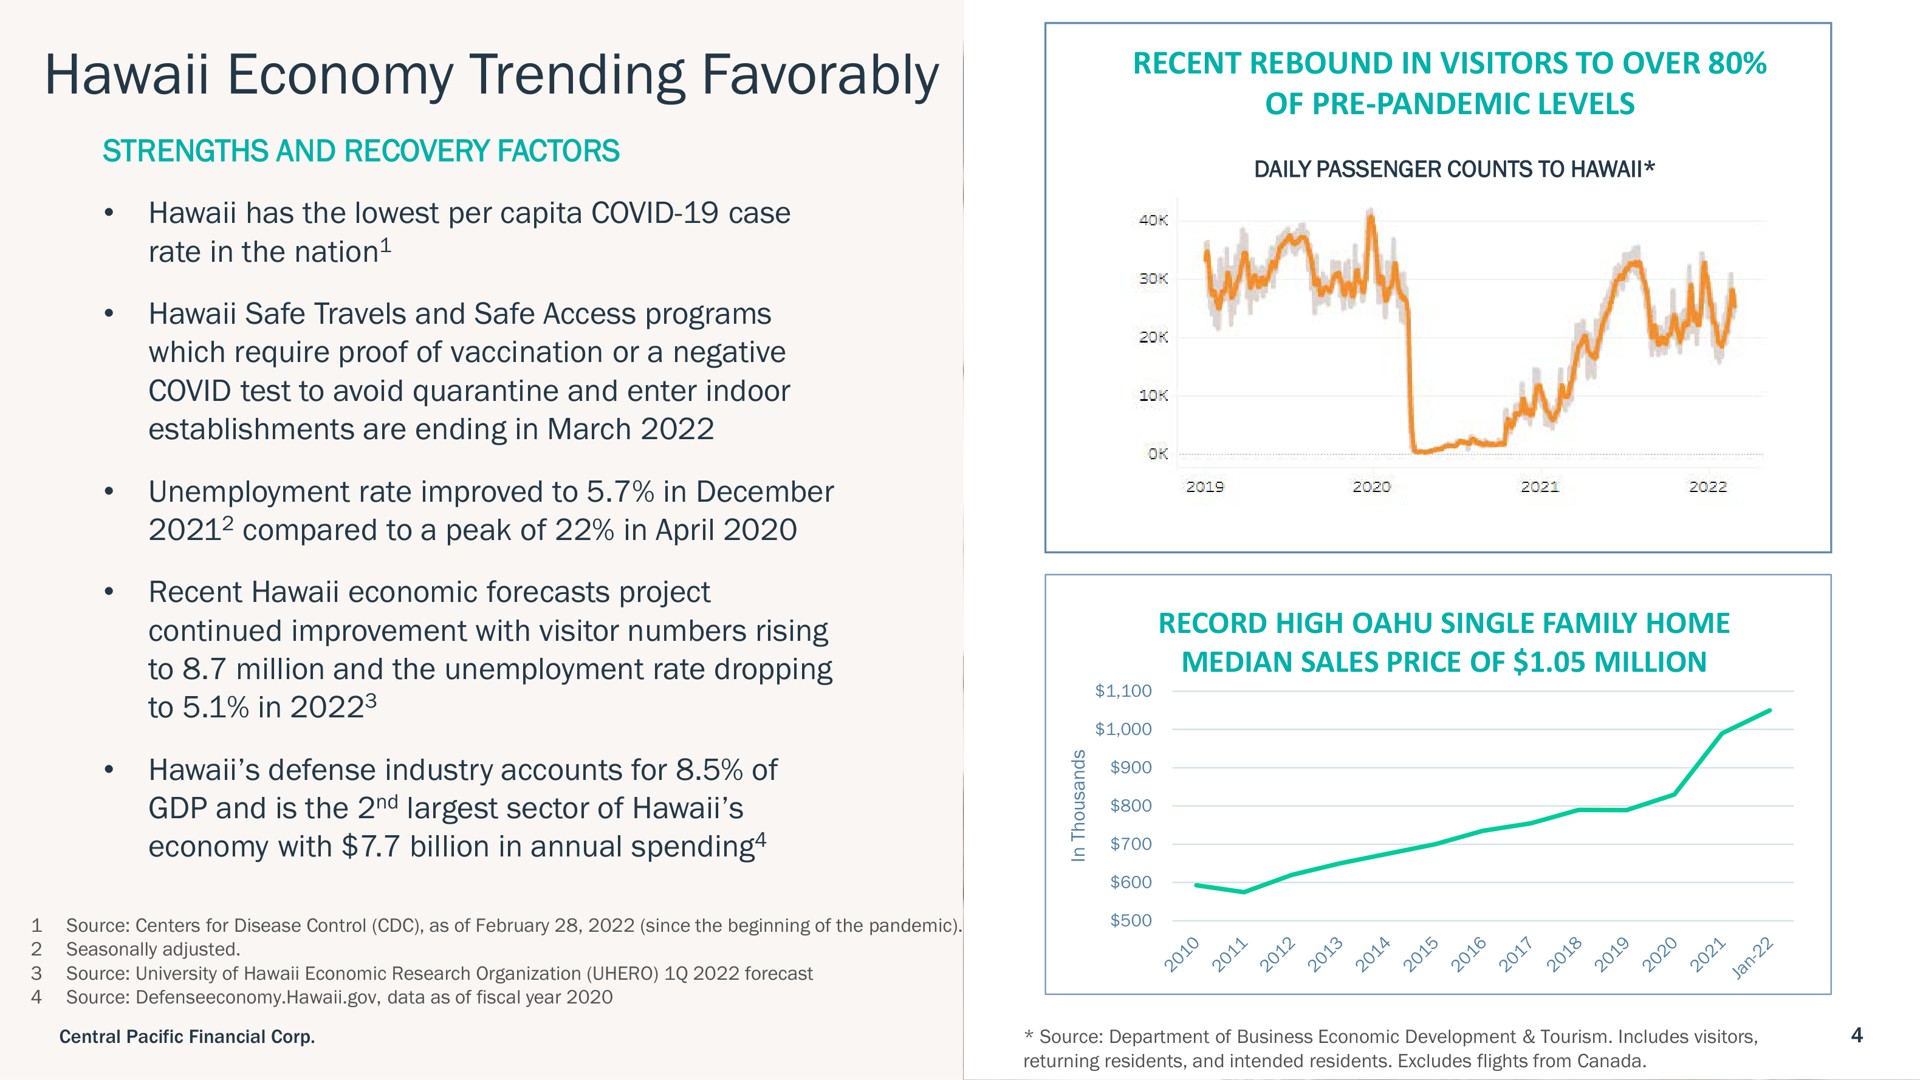 economy trending favorably | Central Pacific Financial